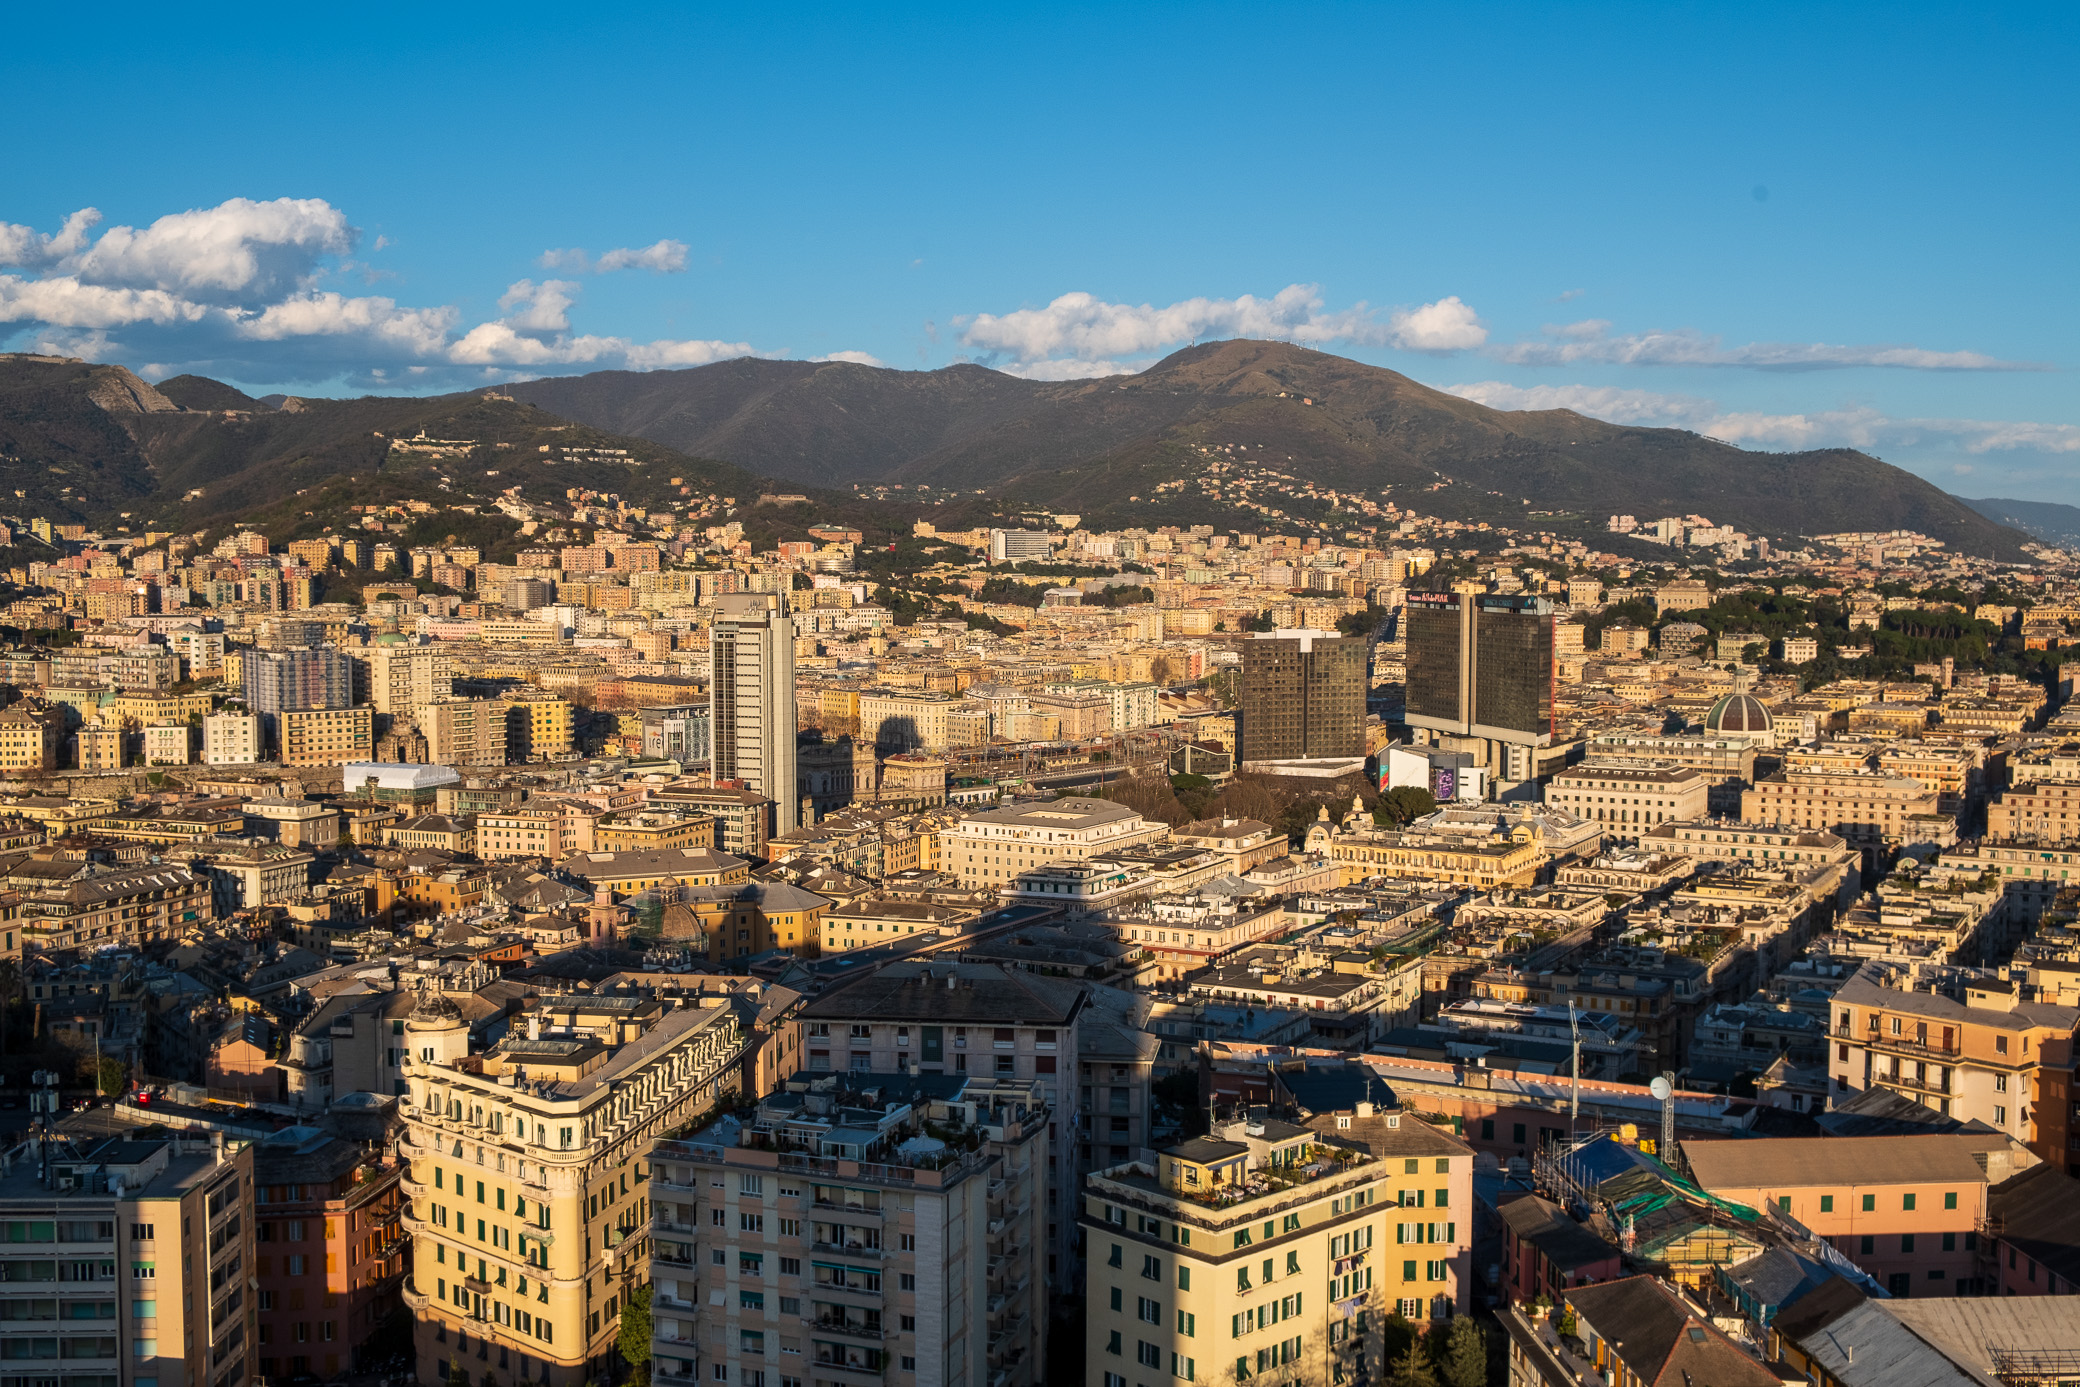 Genoa from above - seen from the Terrazza Colmbo on top of the Piacentini Skyscraper